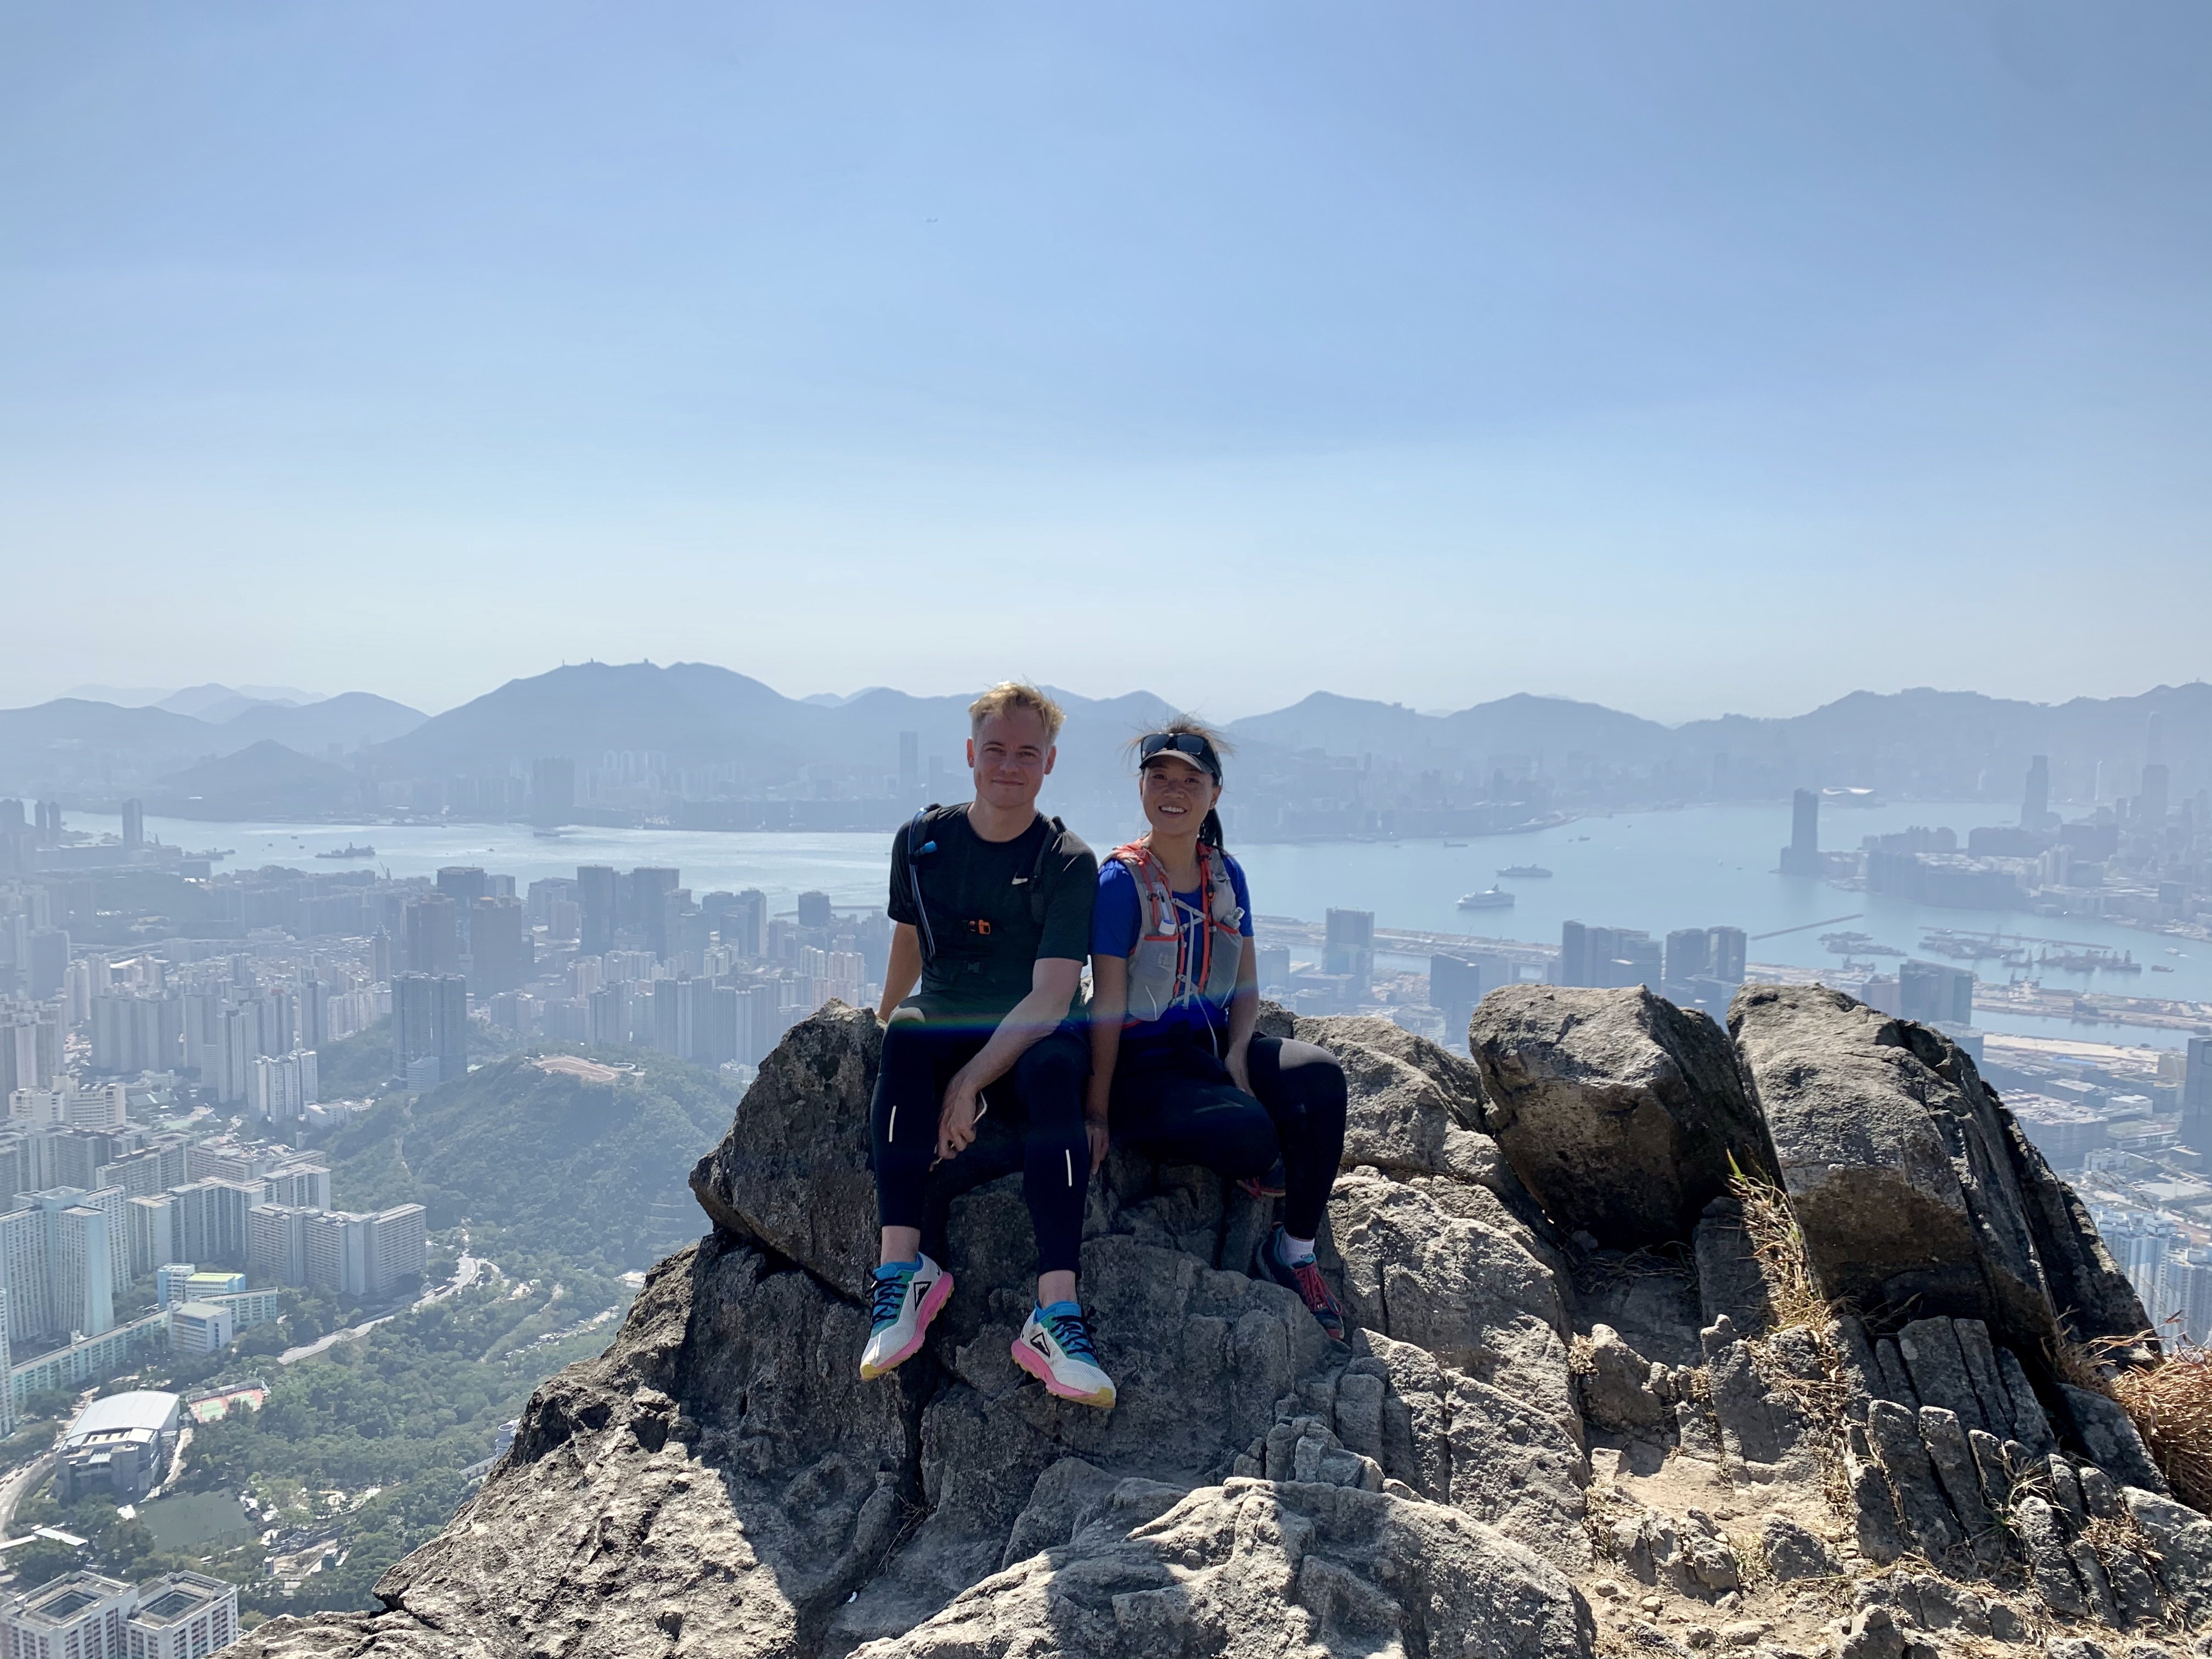 Charissa Chan and Sam Lynn, who met in Hong Kong, have not seen each other since Christmas 2019. The coronavirus pandemic has forced the couple and others into long-distance relationships. Photo: Charissa Chan